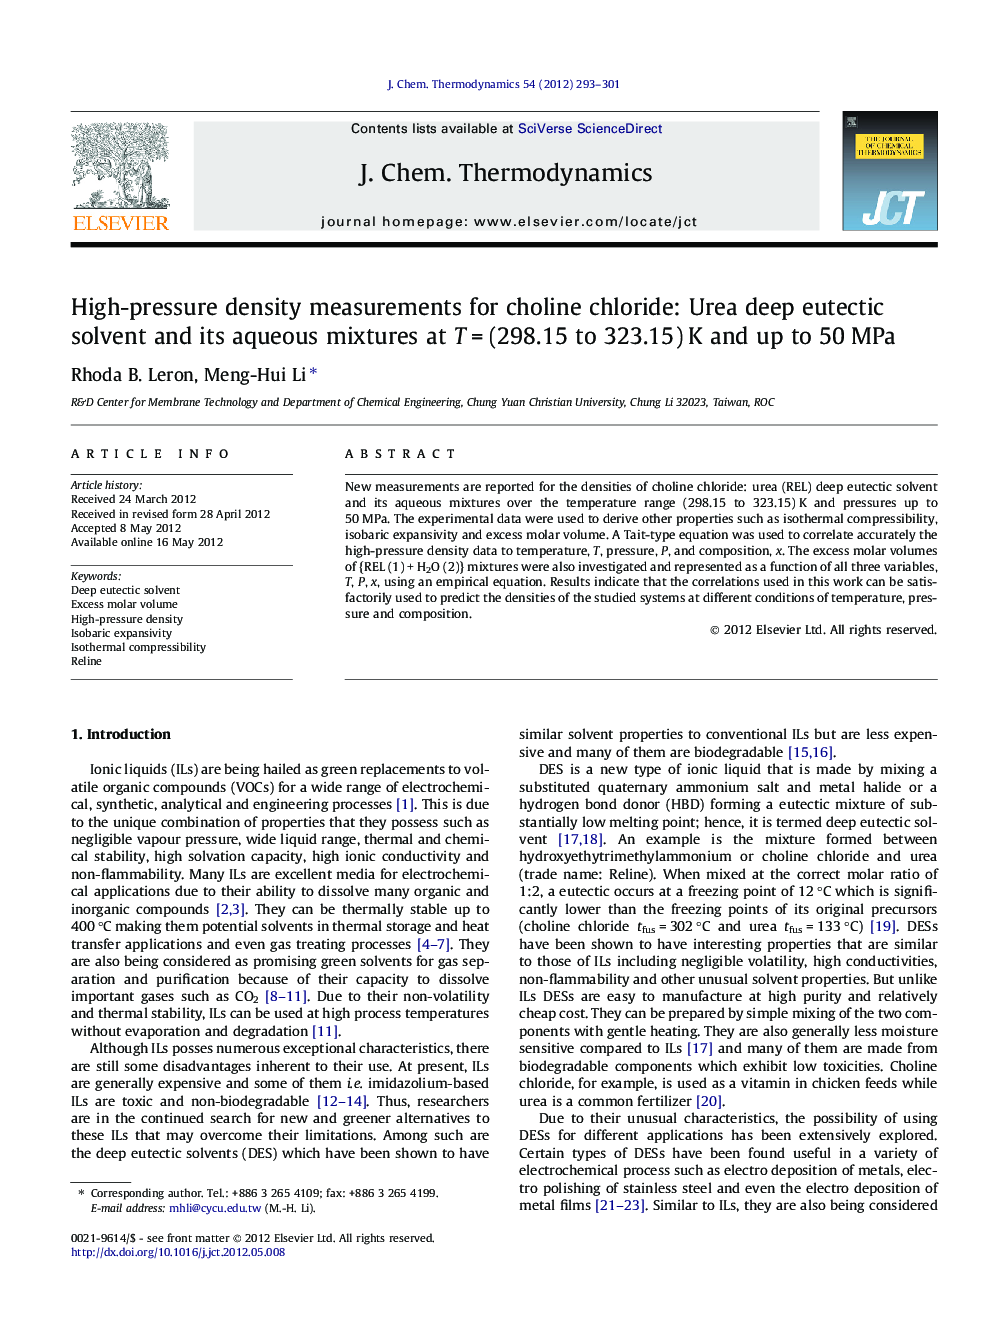 High-pressure density measurements for choline chloride: Urea deep eutectic solvent and its aqueous mixtures at T = (298.15 to 323.15) K and up to 50 MPa